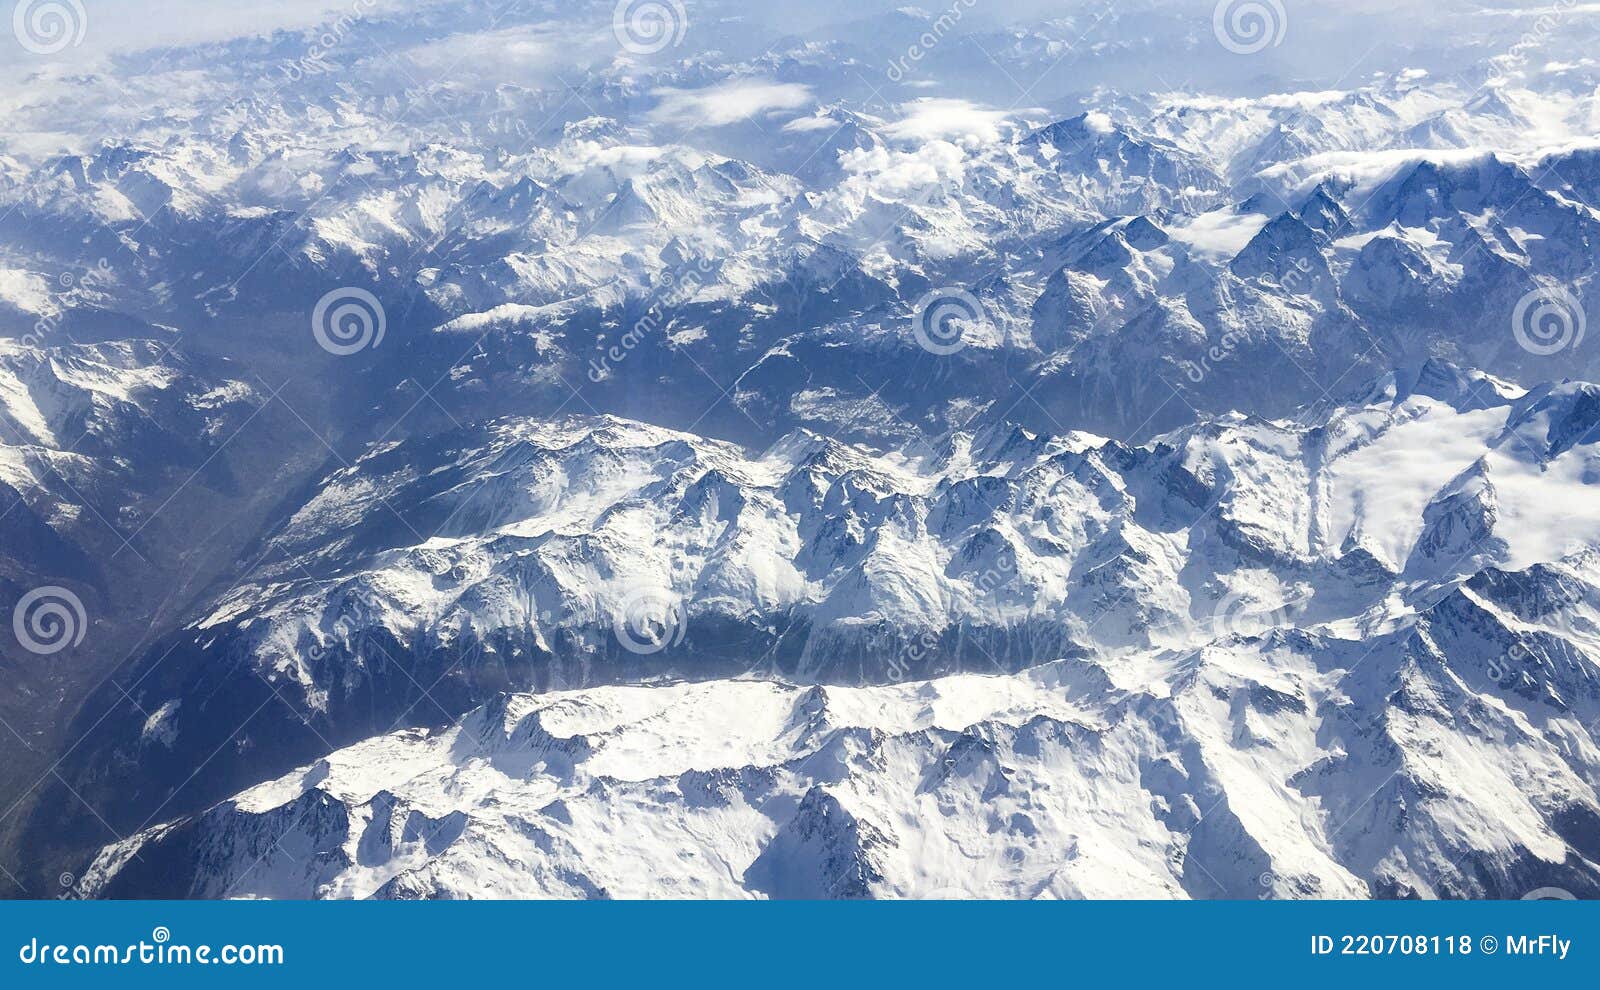 alps mountainrange from above